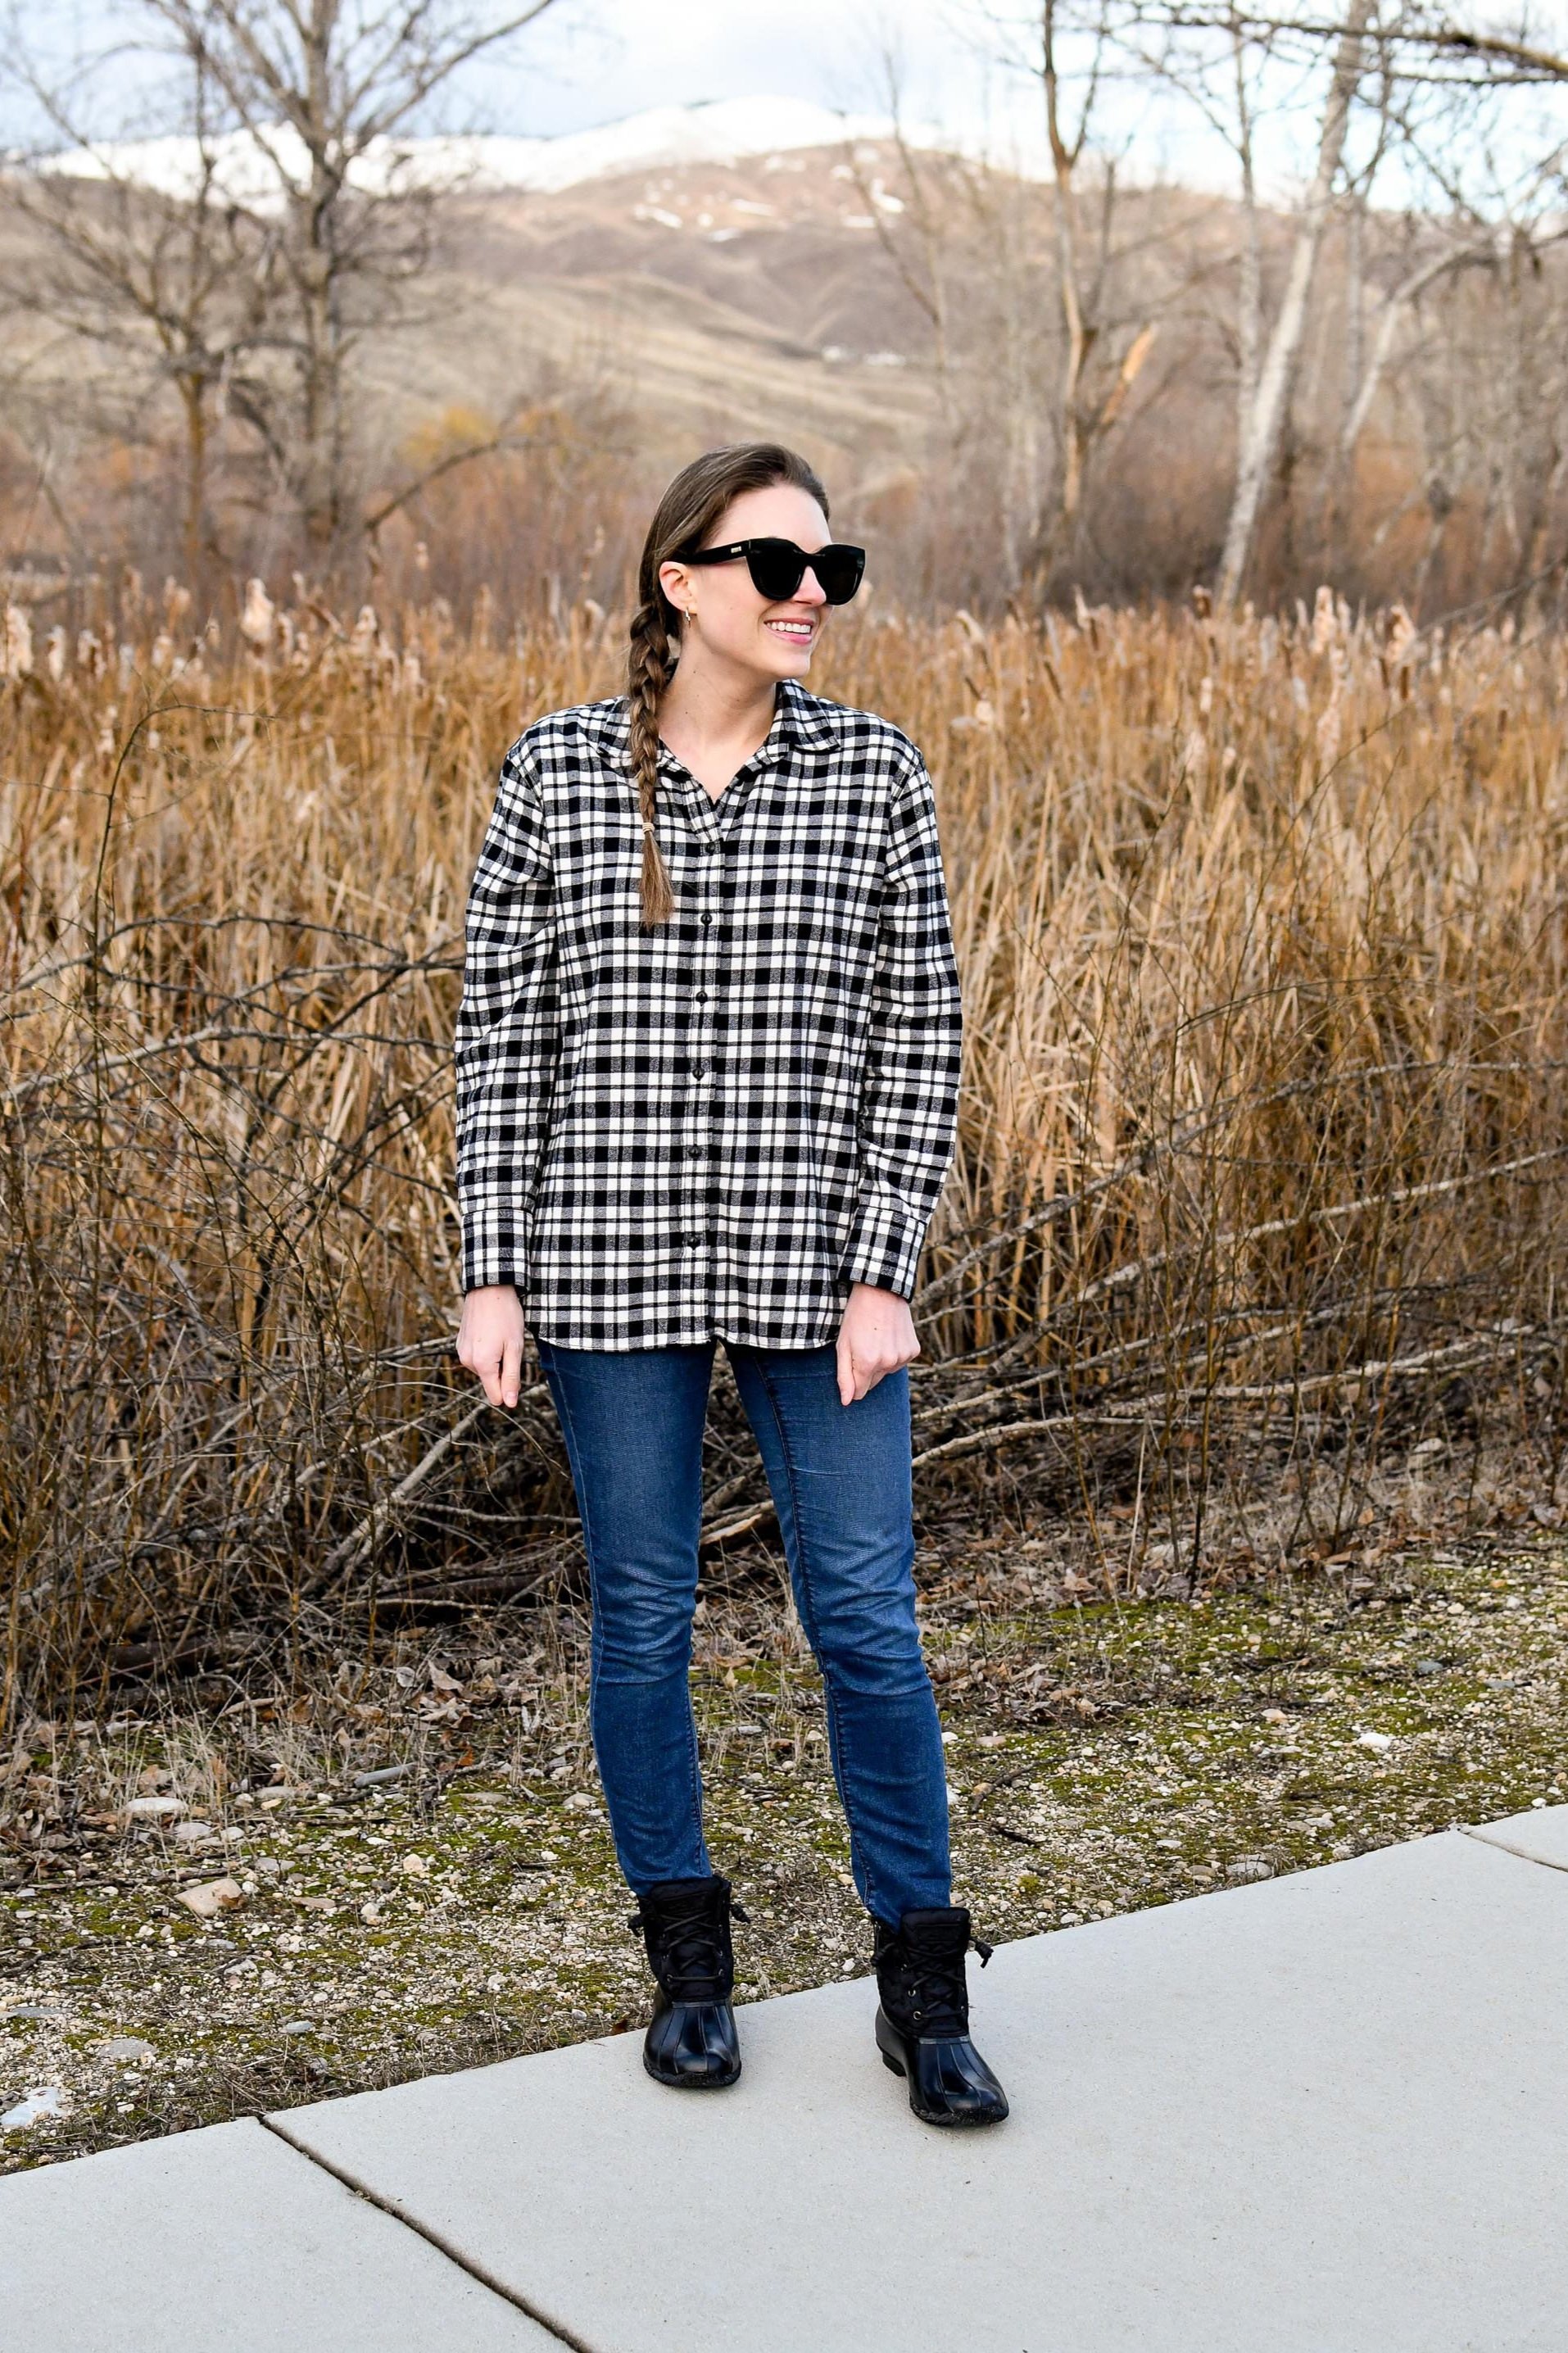 How to Style a Flannel Shirt (+ 16 Outfit Ideas)